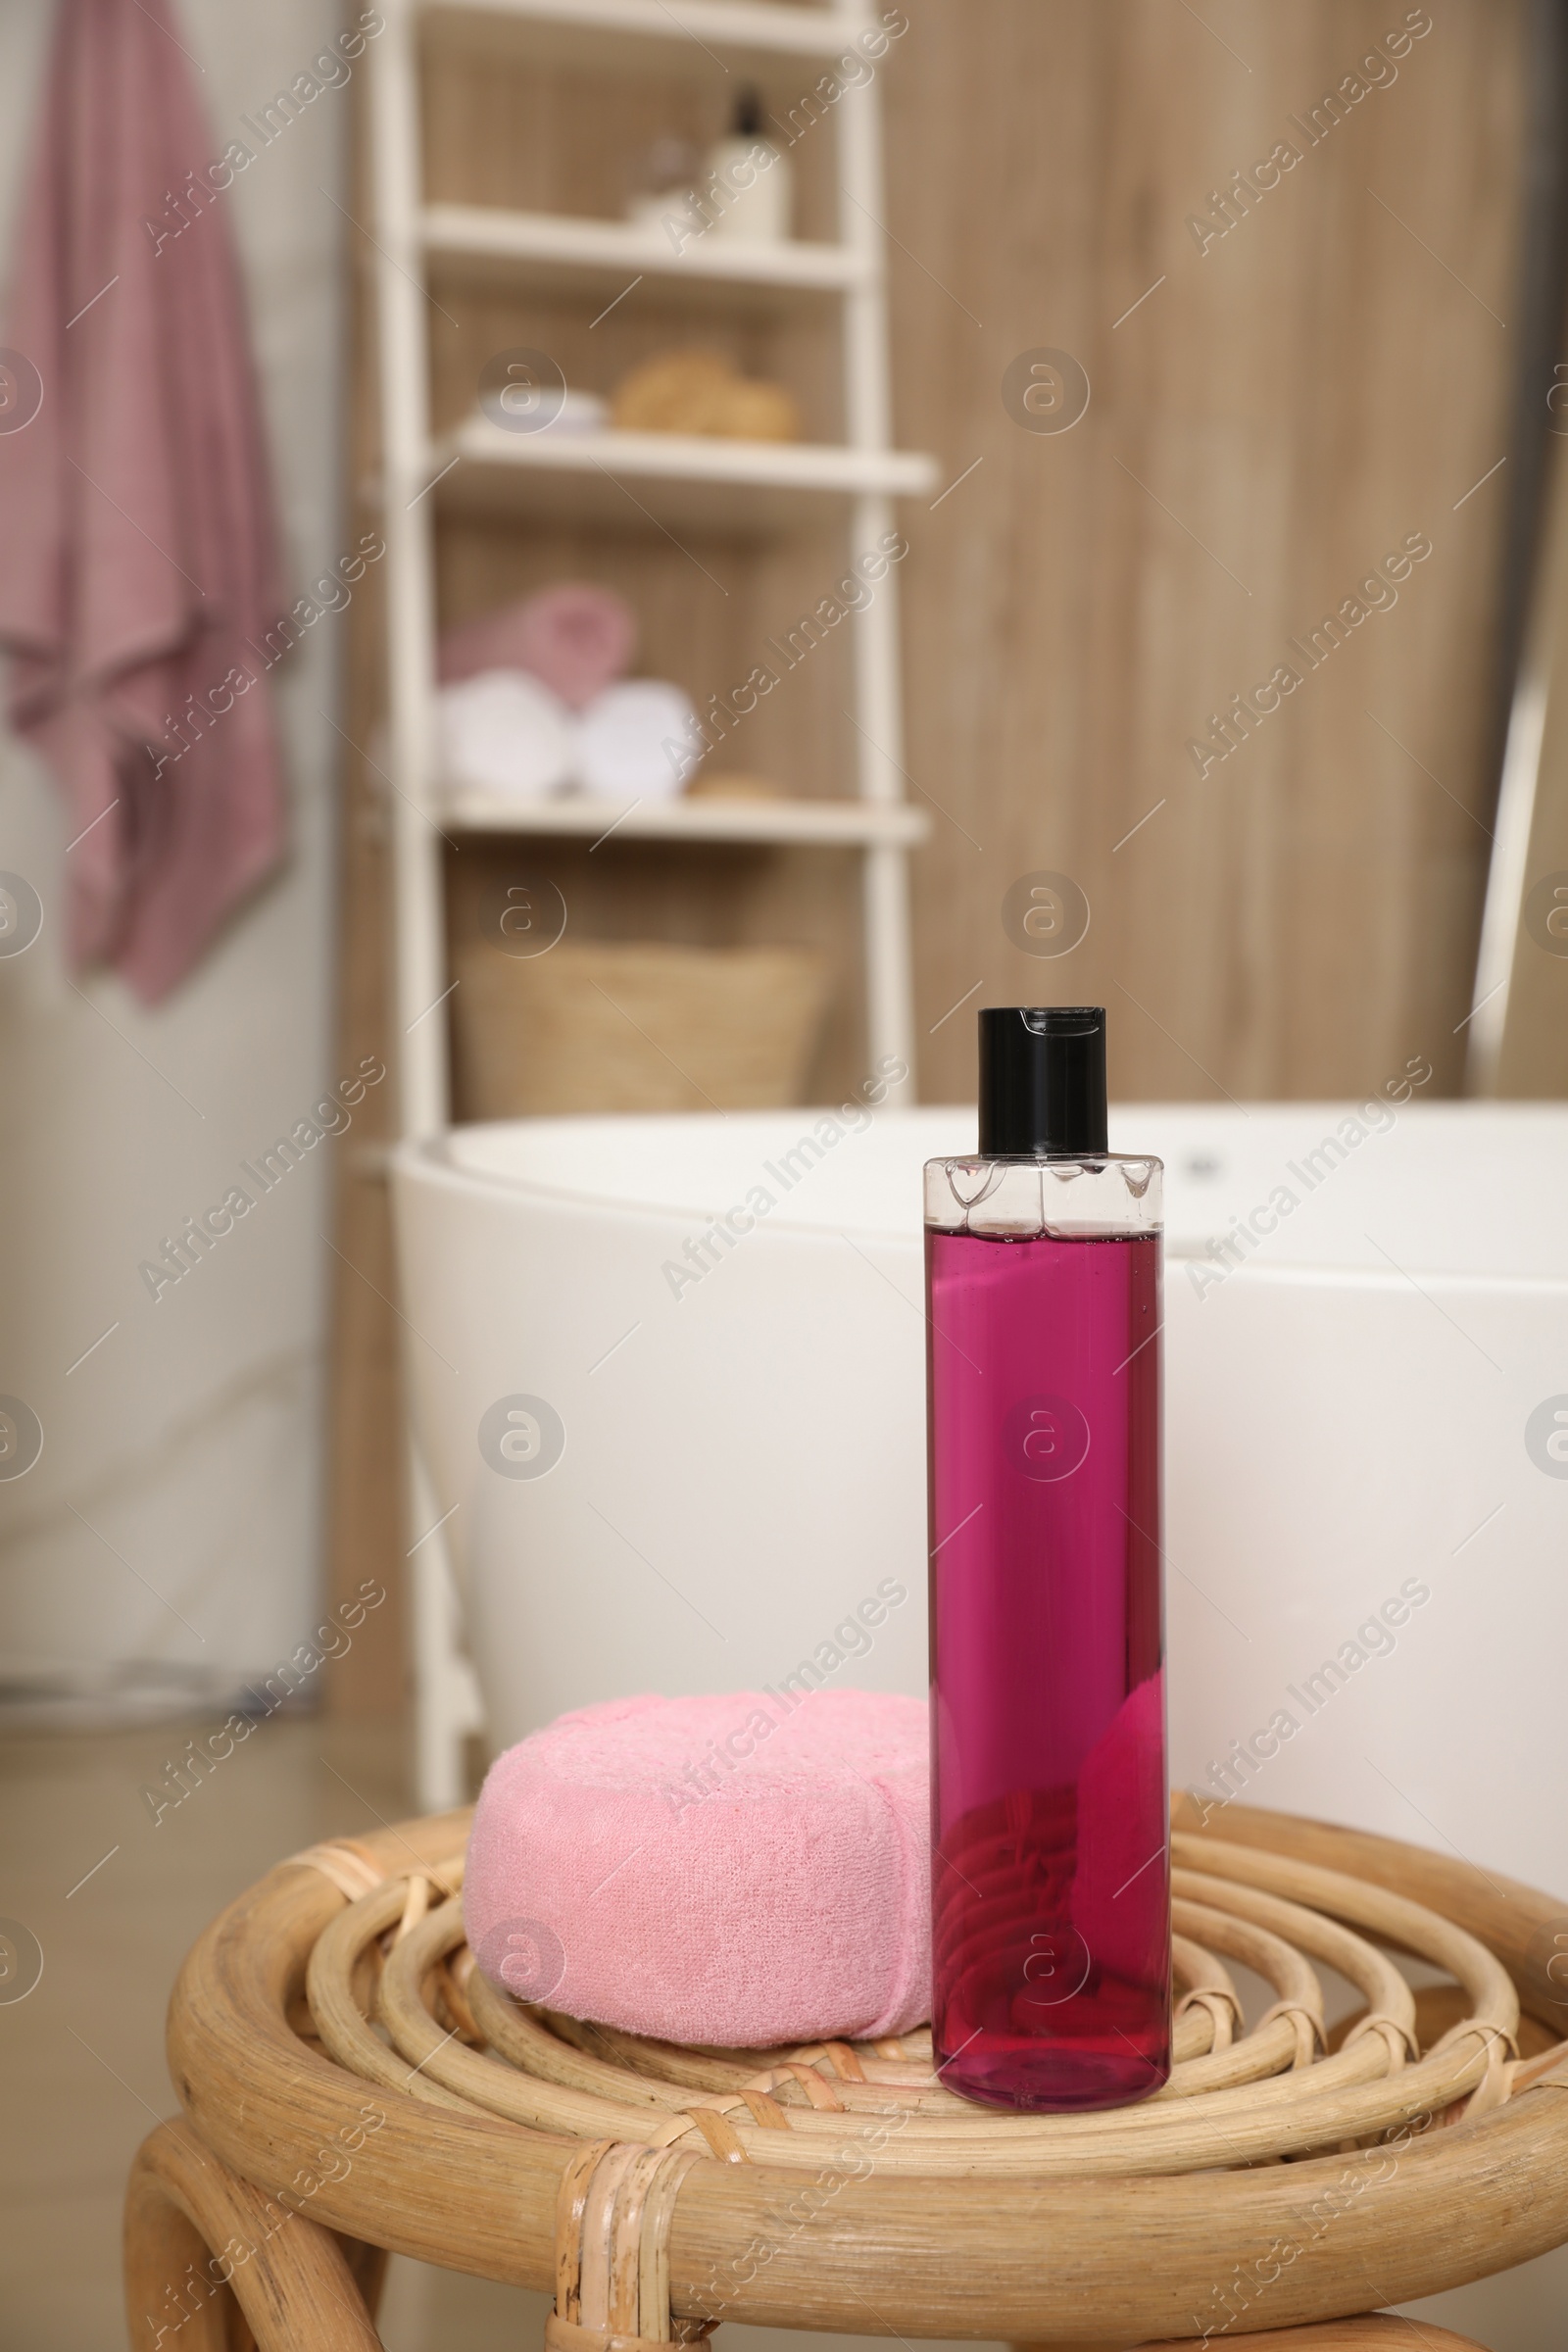 Photo of Bottle of shower gel and sponge on wicker table near tub in bathroom, space for text